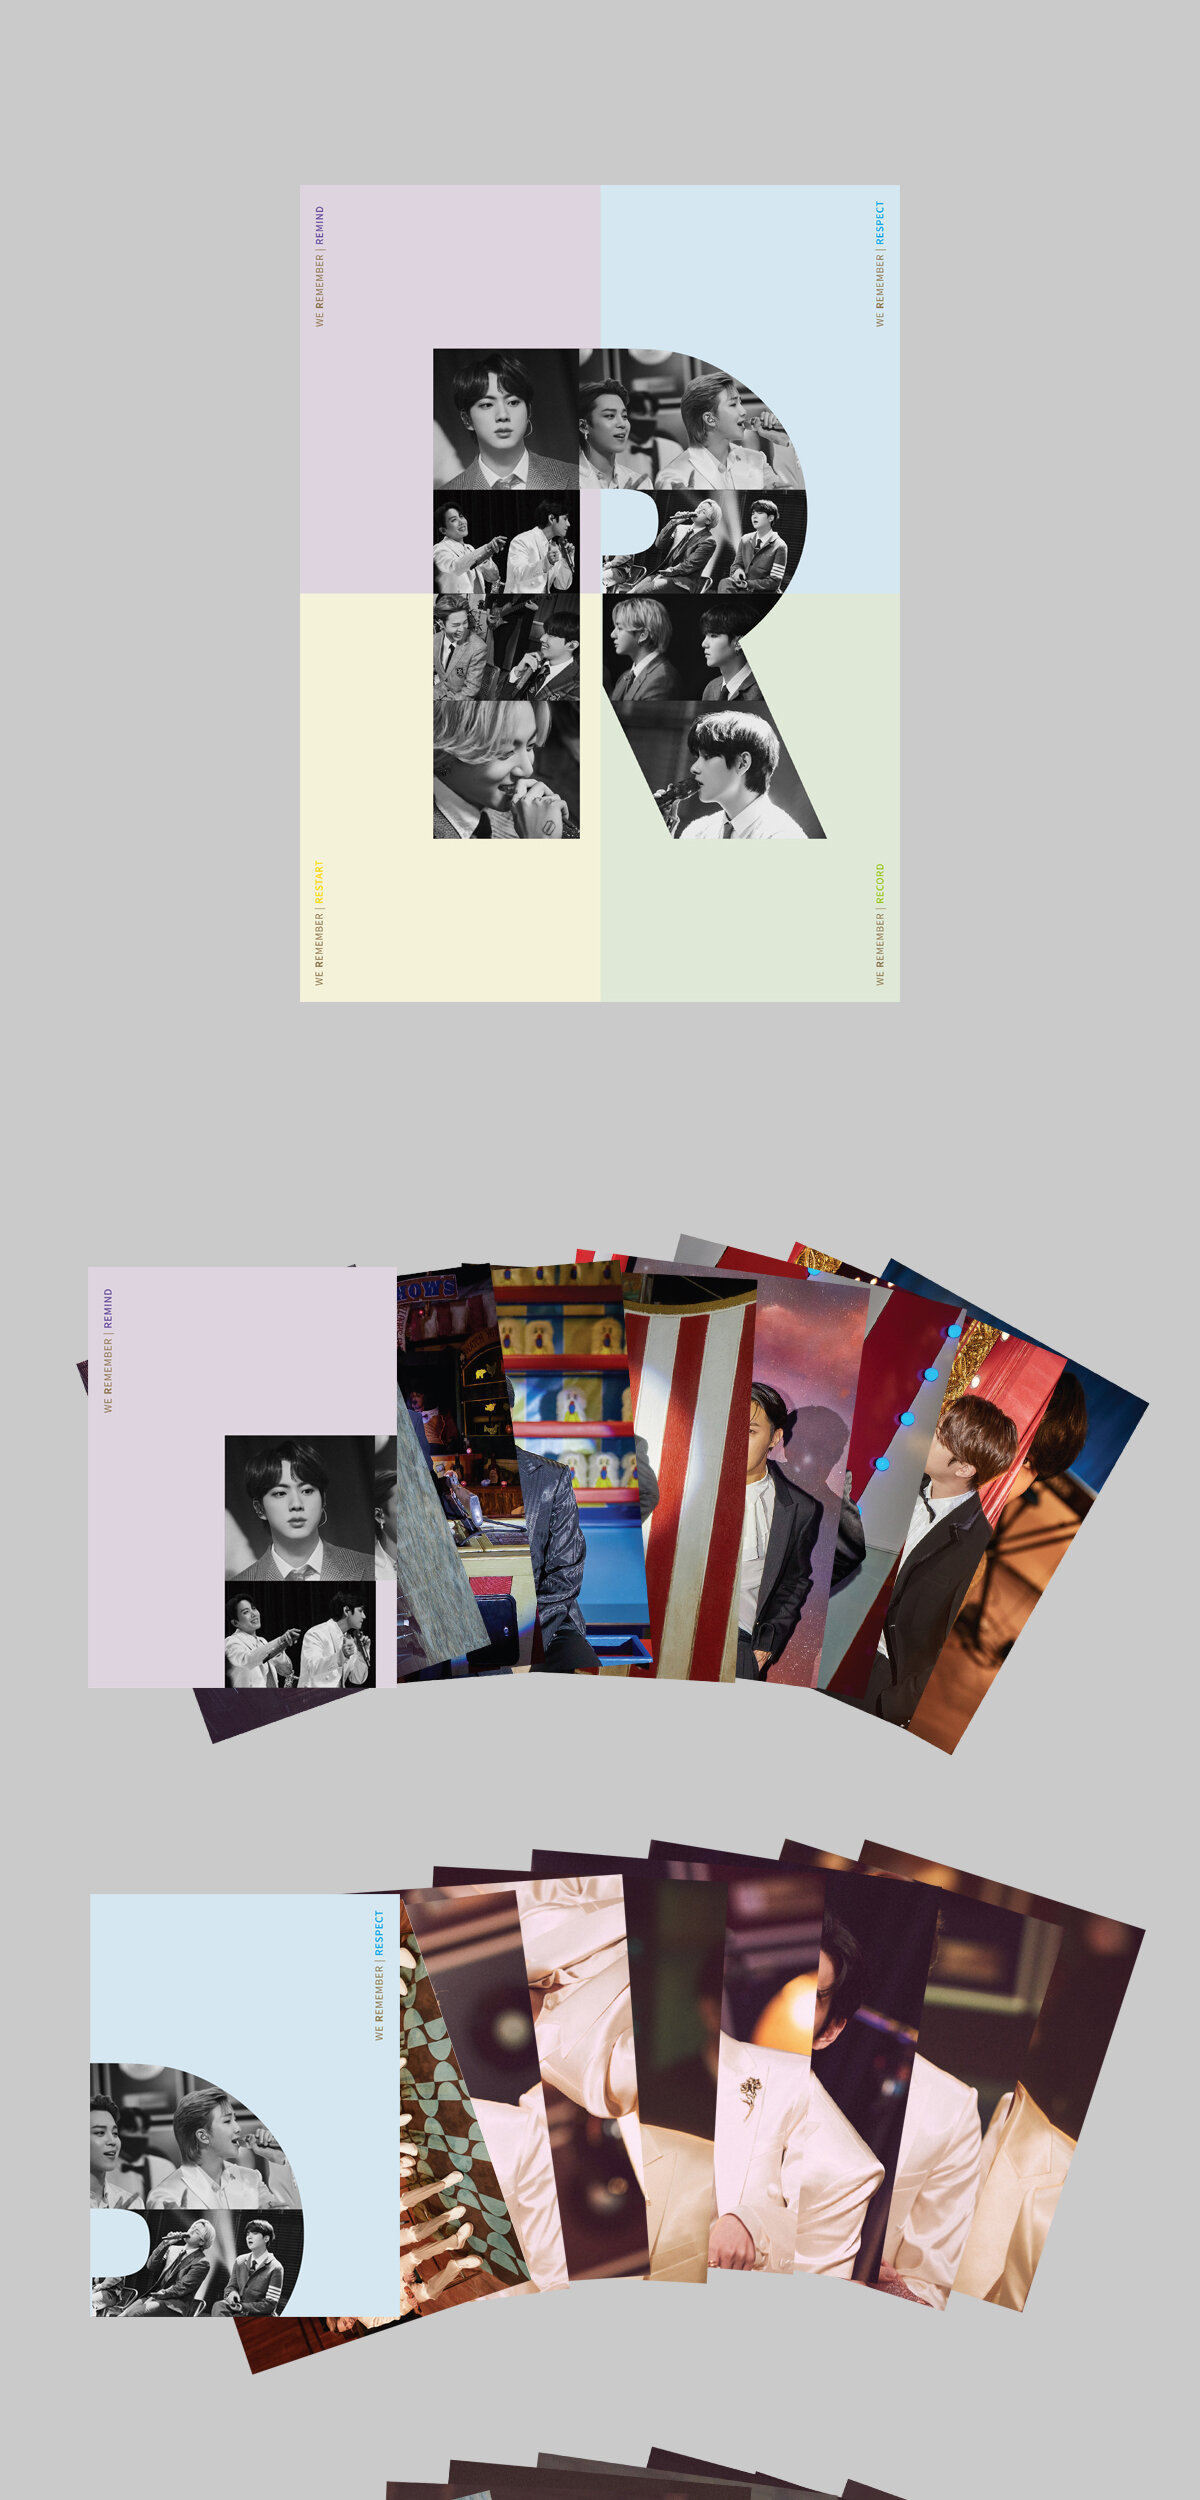 MERCH] THE FACT BTS PHOTOBOOK SPECIAL EDITION : WE REMEMBER — US 